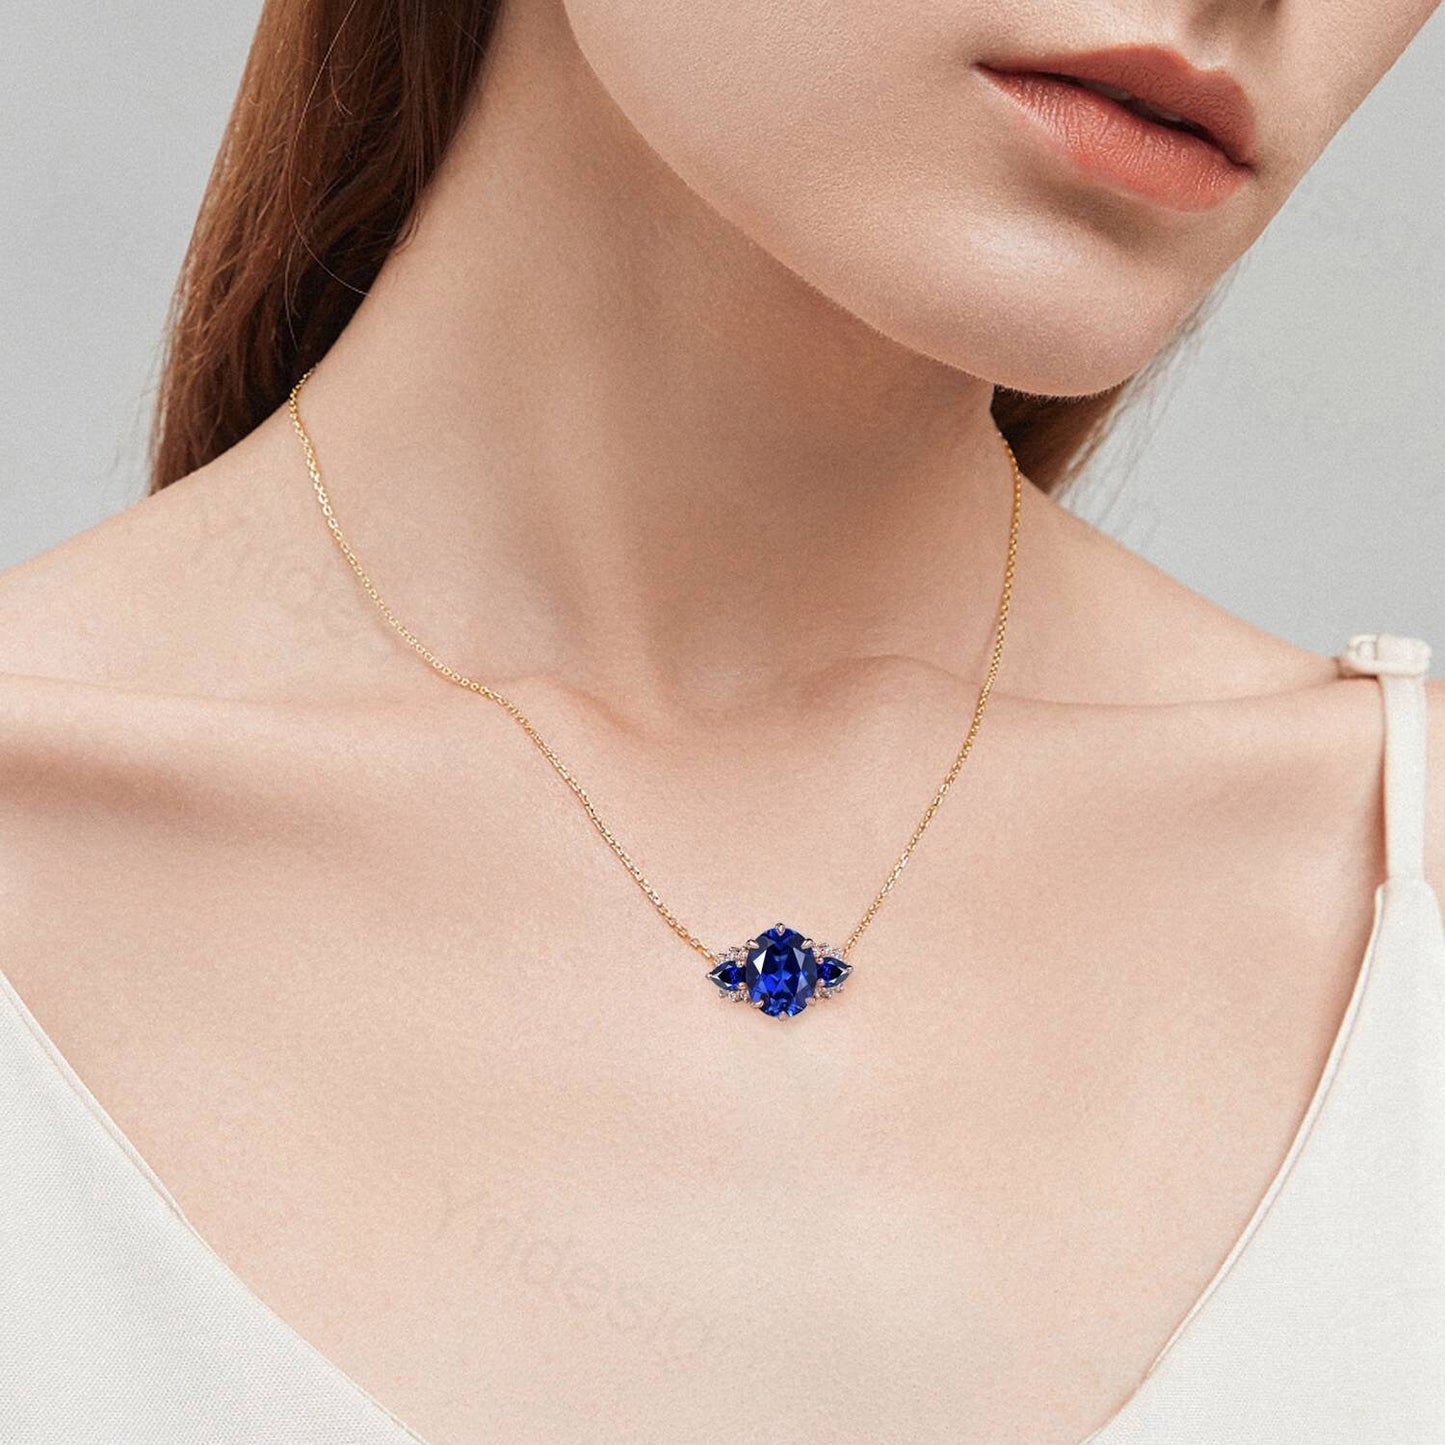 8x10mm Oval Sapphire Pendant Necklace Vintage Unique Pear Blue Sapphire Pendant Necklace Rose Gold Retro Christmas Promise Gift for Women - PENFINE